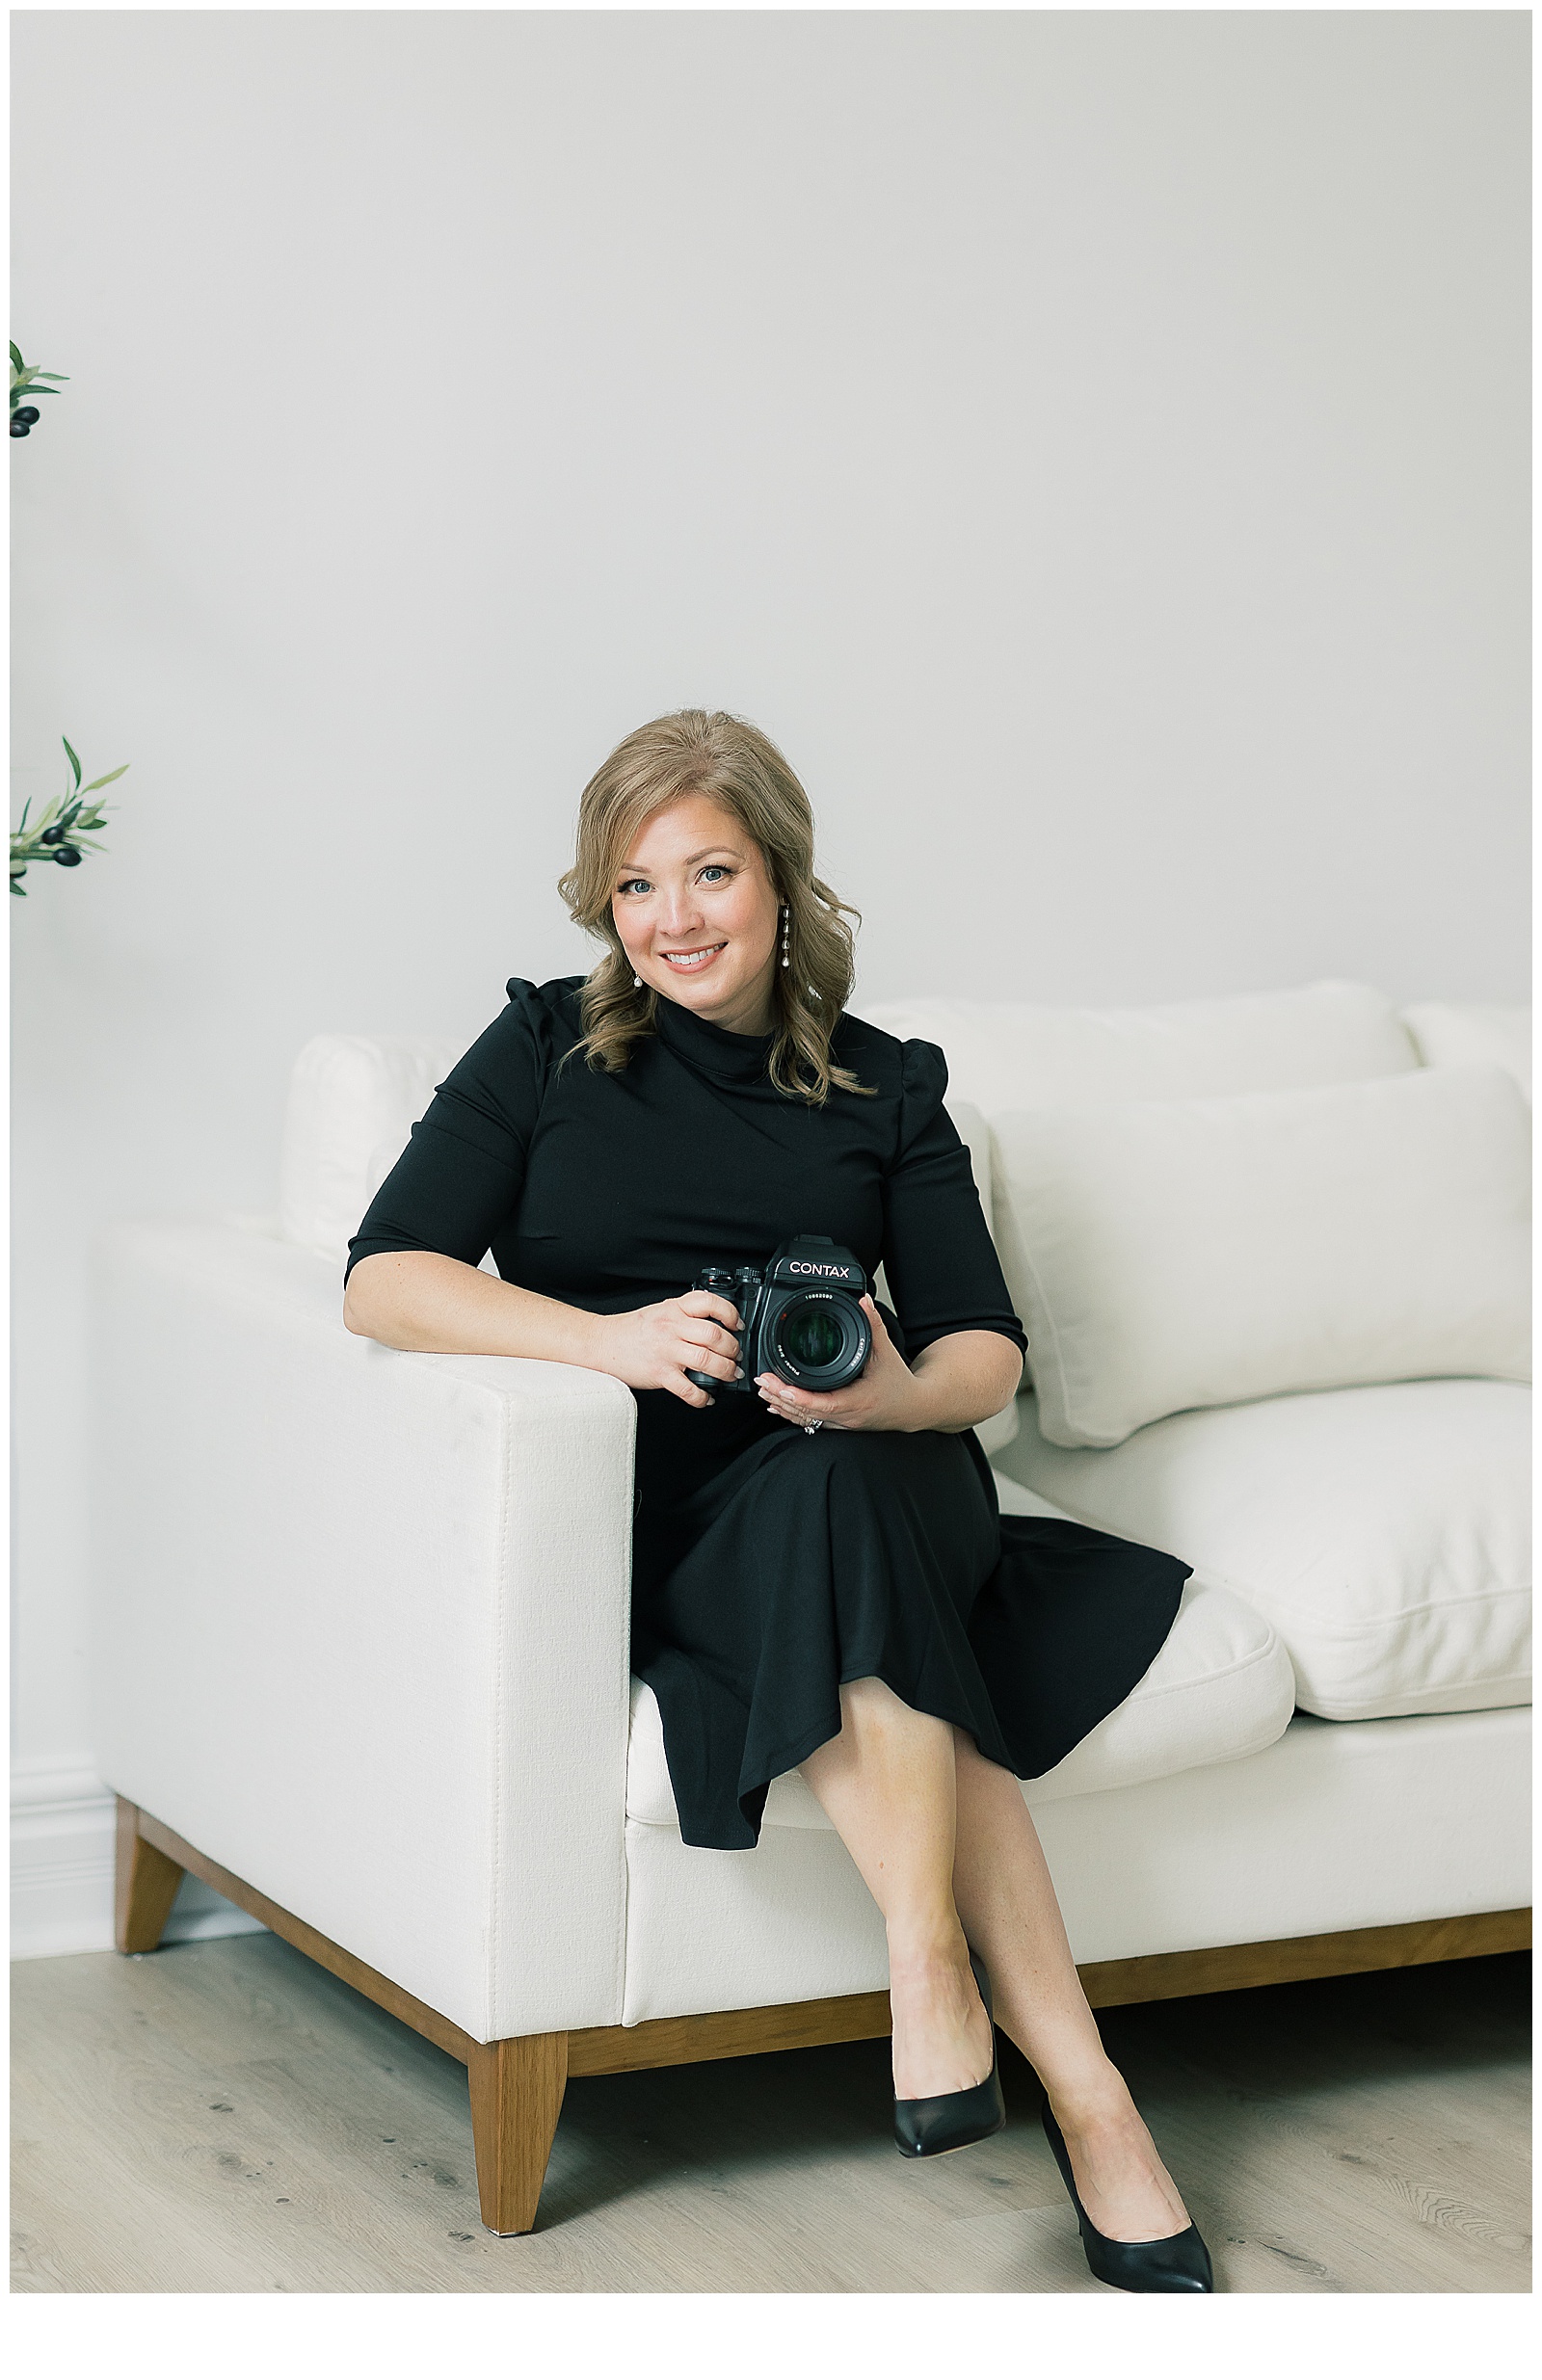 The photographer, Amy Simkus, is wearing a black dress and black high heels while seated on a modern white sofa holding a medium format film camera.